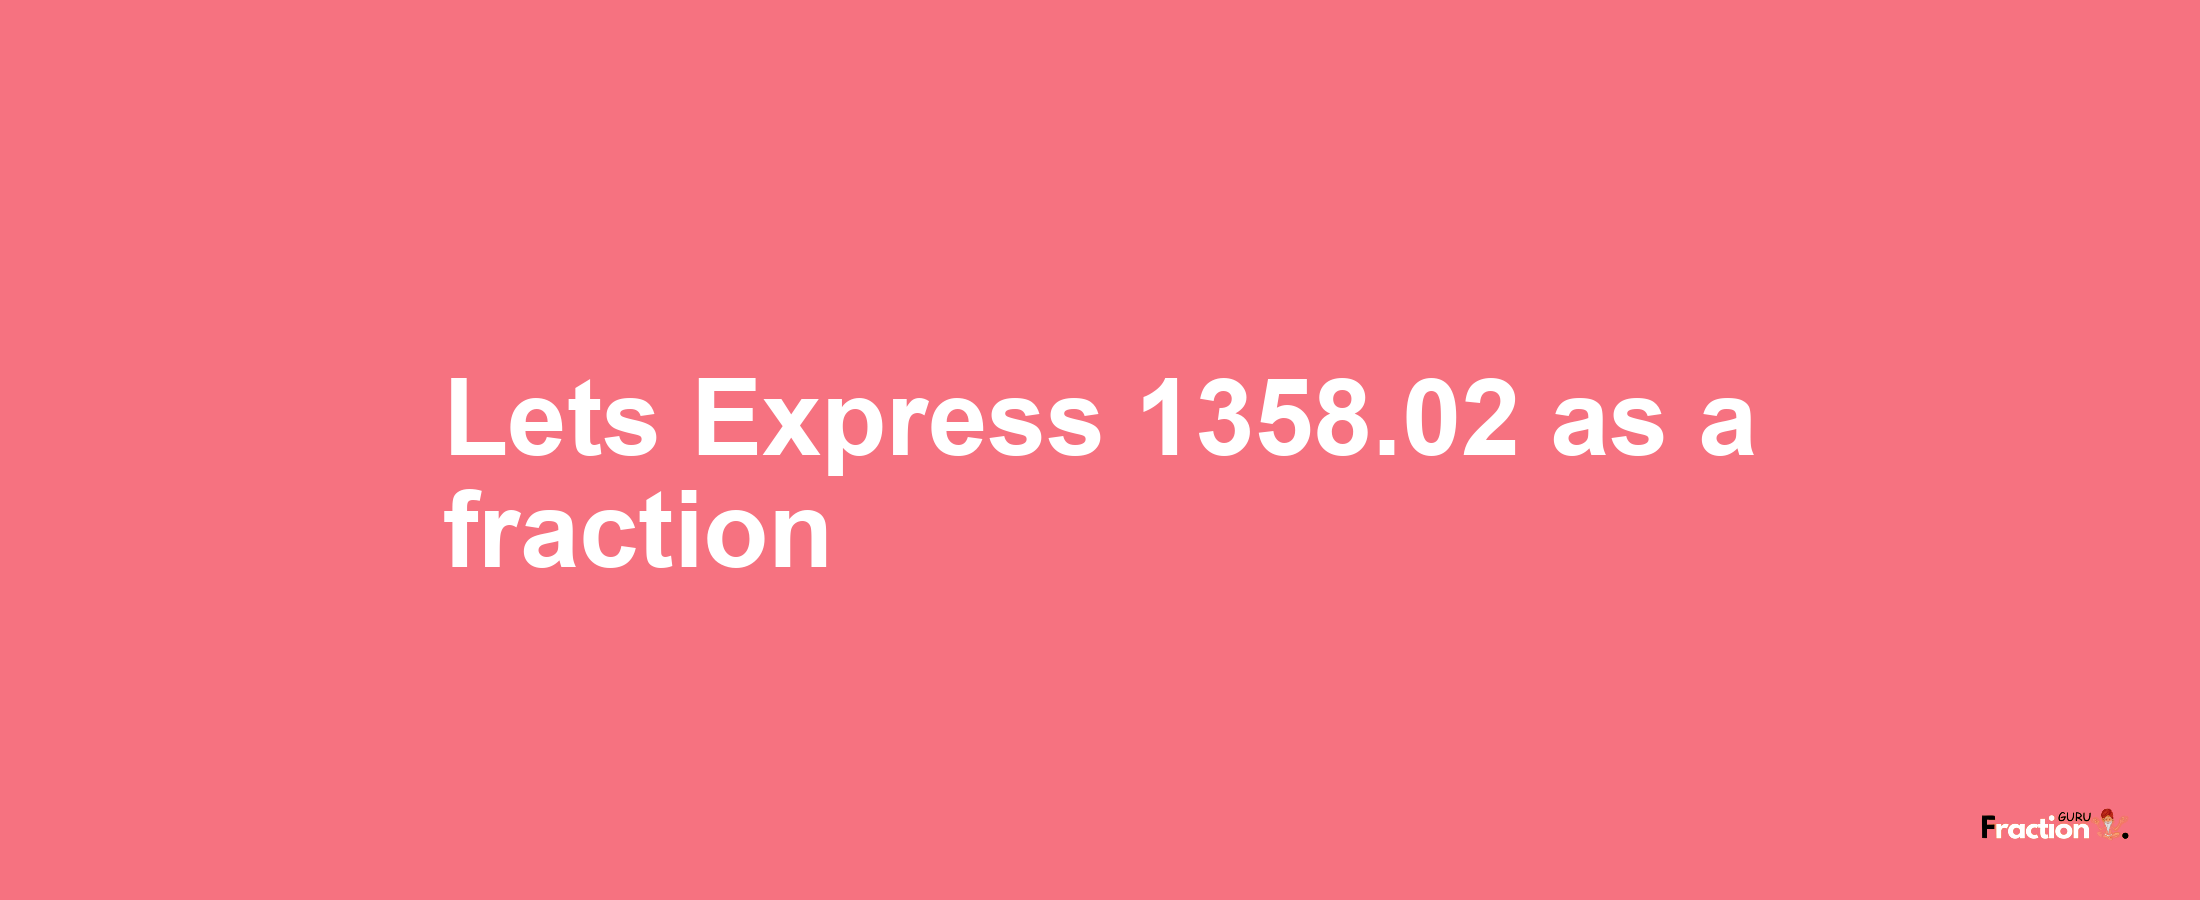 Lets Express 1358.02 as afraction